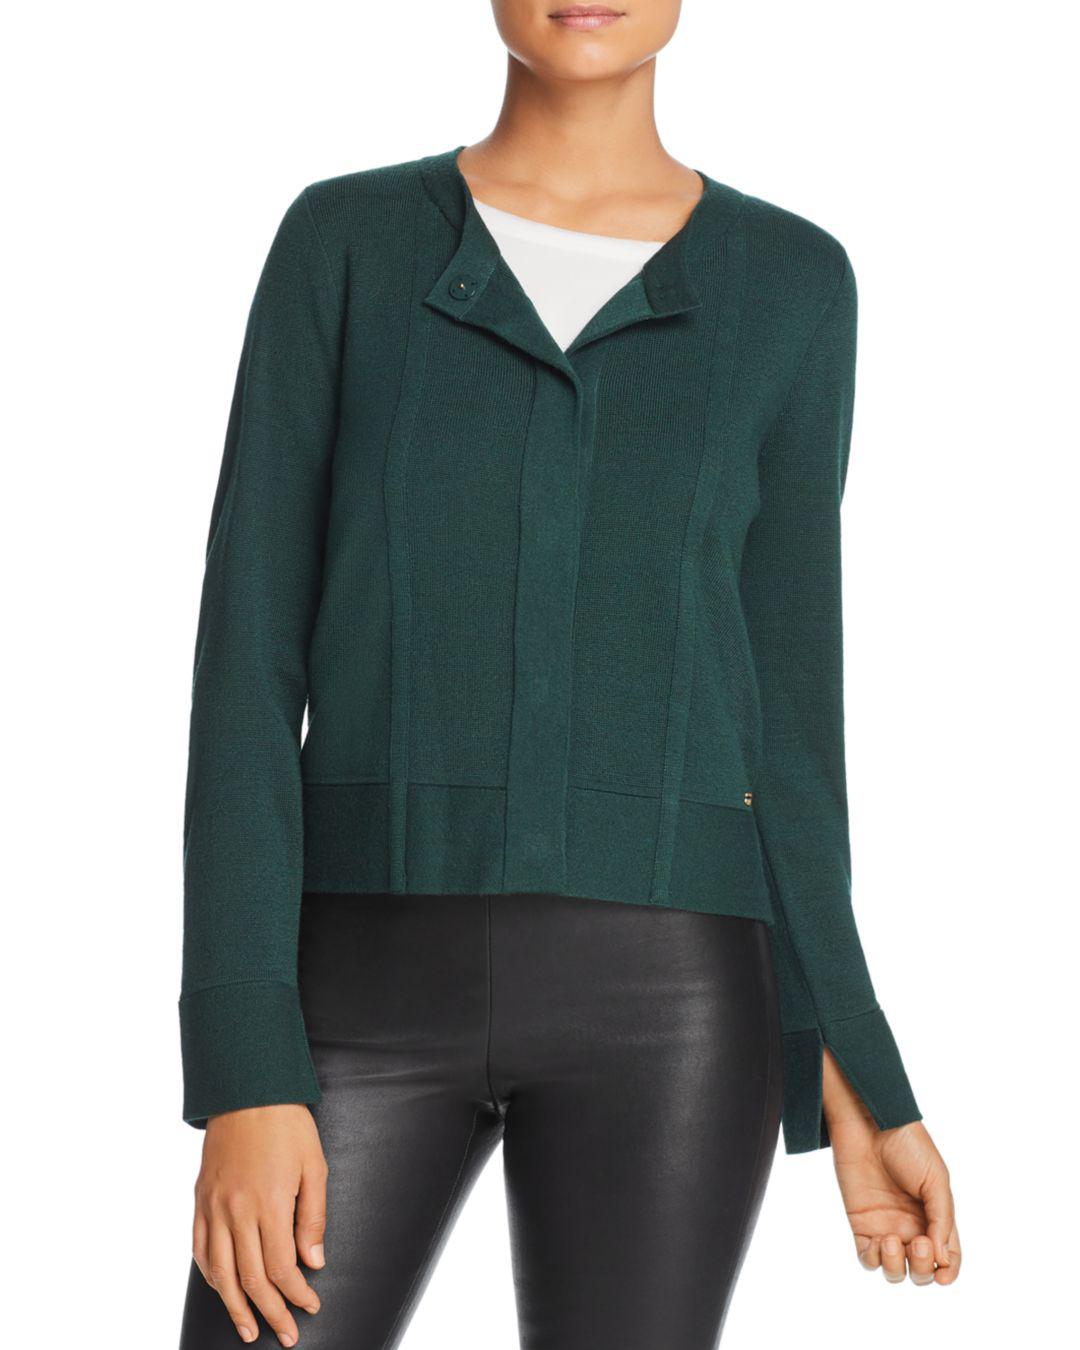 Lyst - Donna Karan New York Concealed Snap Cardigan in Green